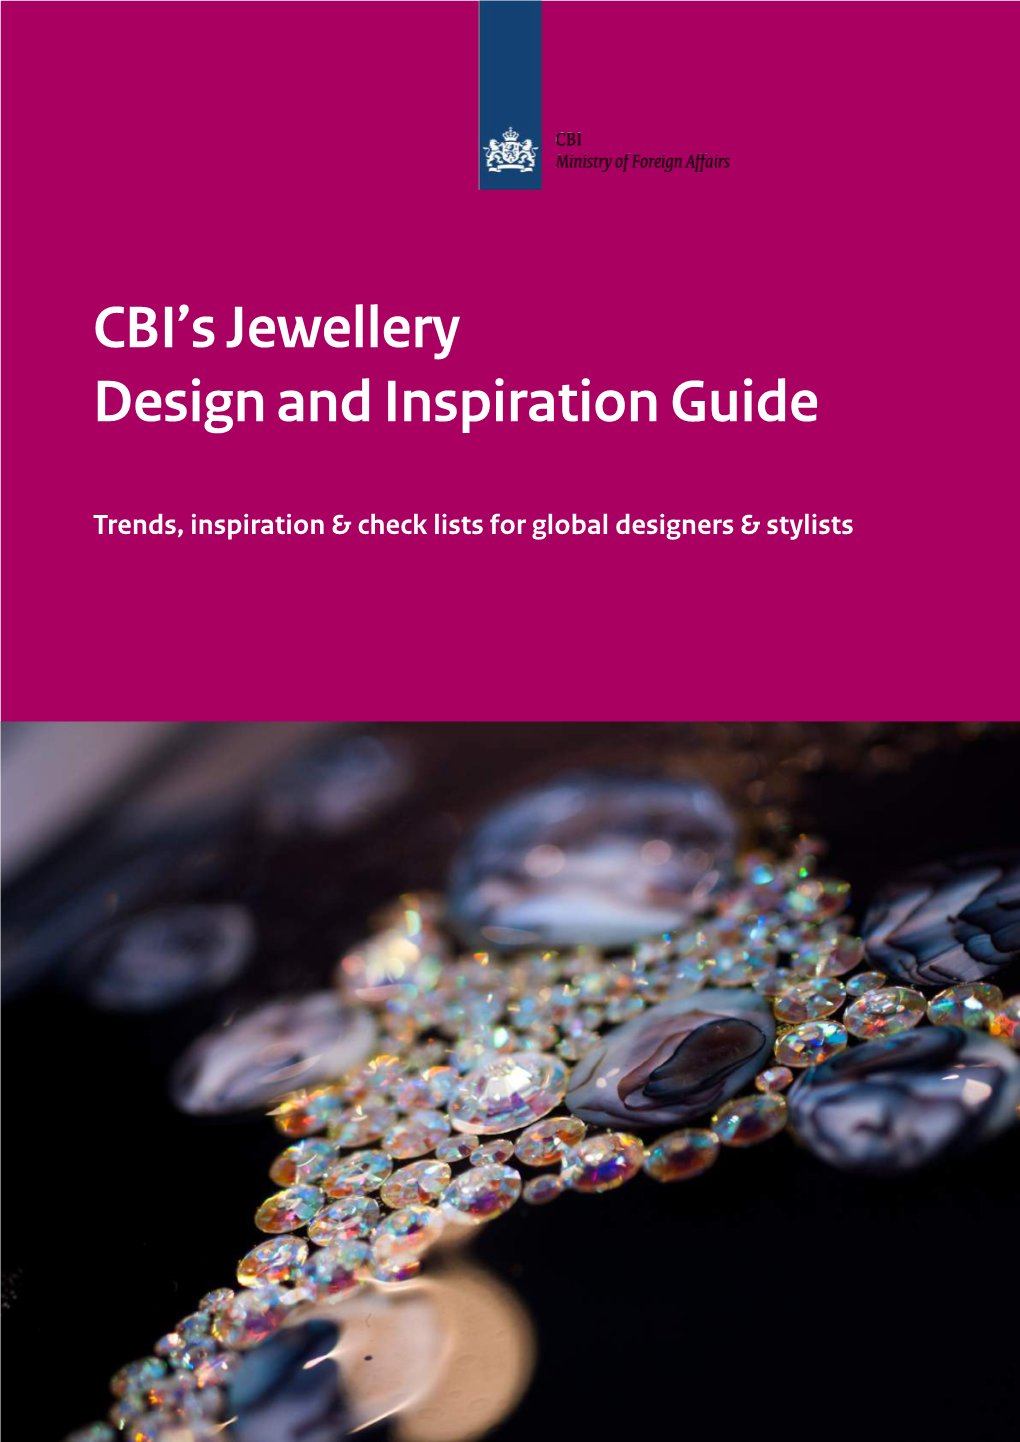 Jewellery Design and Inspiration Guide 2016